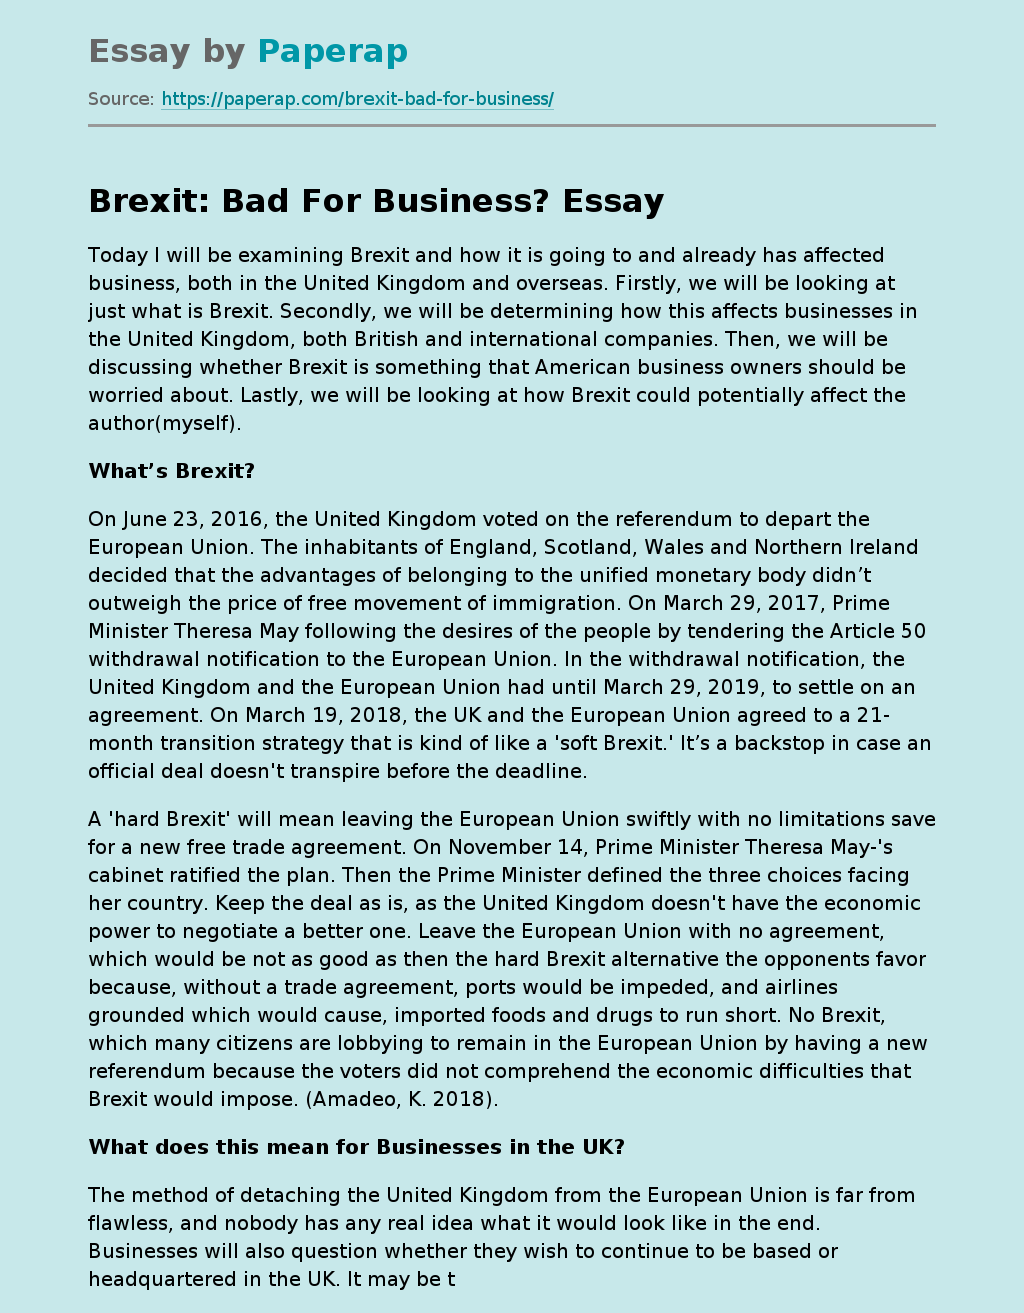 Brexit: Bad For Business?